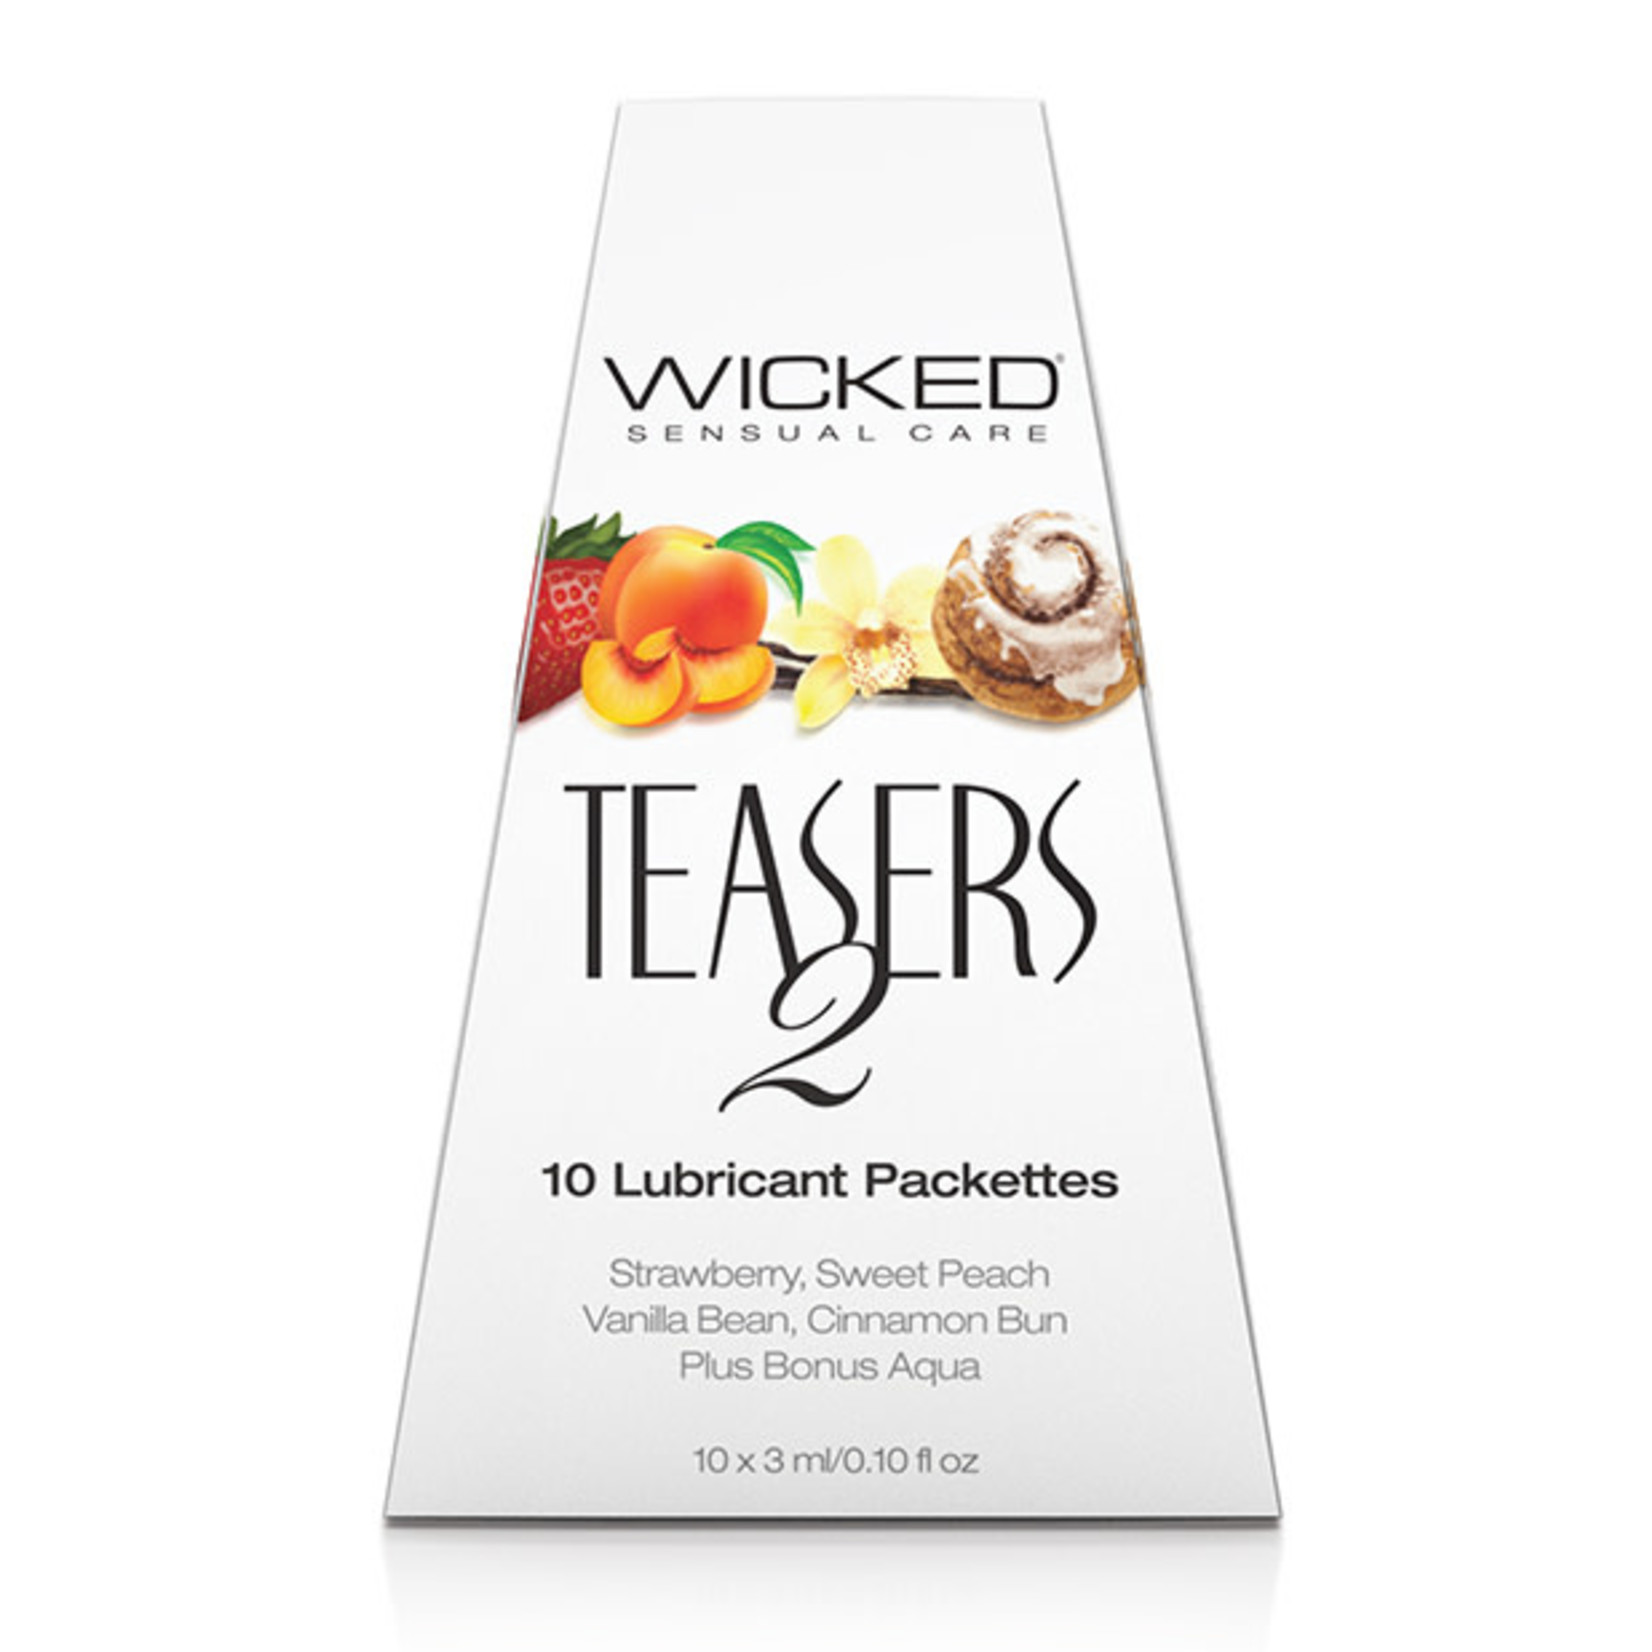 Wicked Teasers 2 Flavored Lubricant